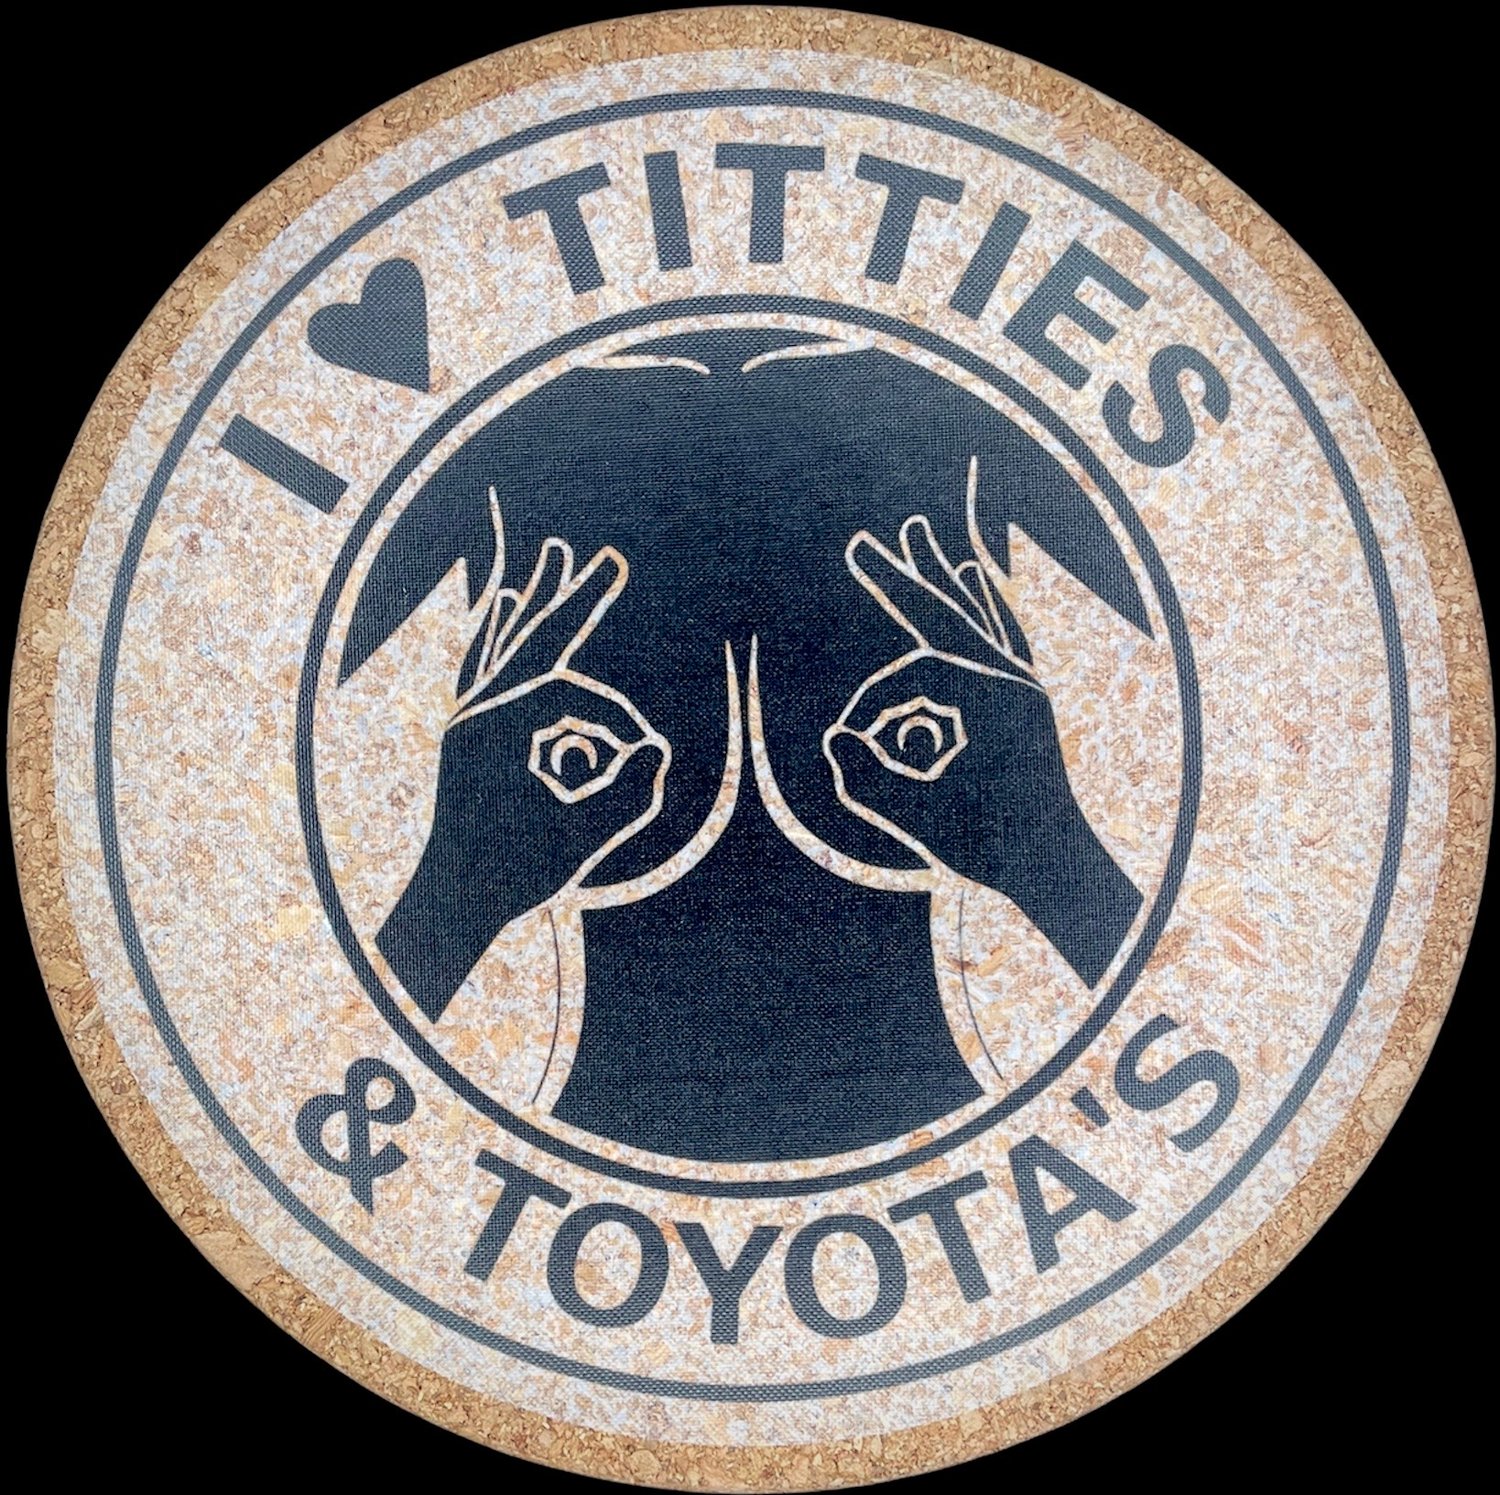 I 🖤 Titties and Toyota’s